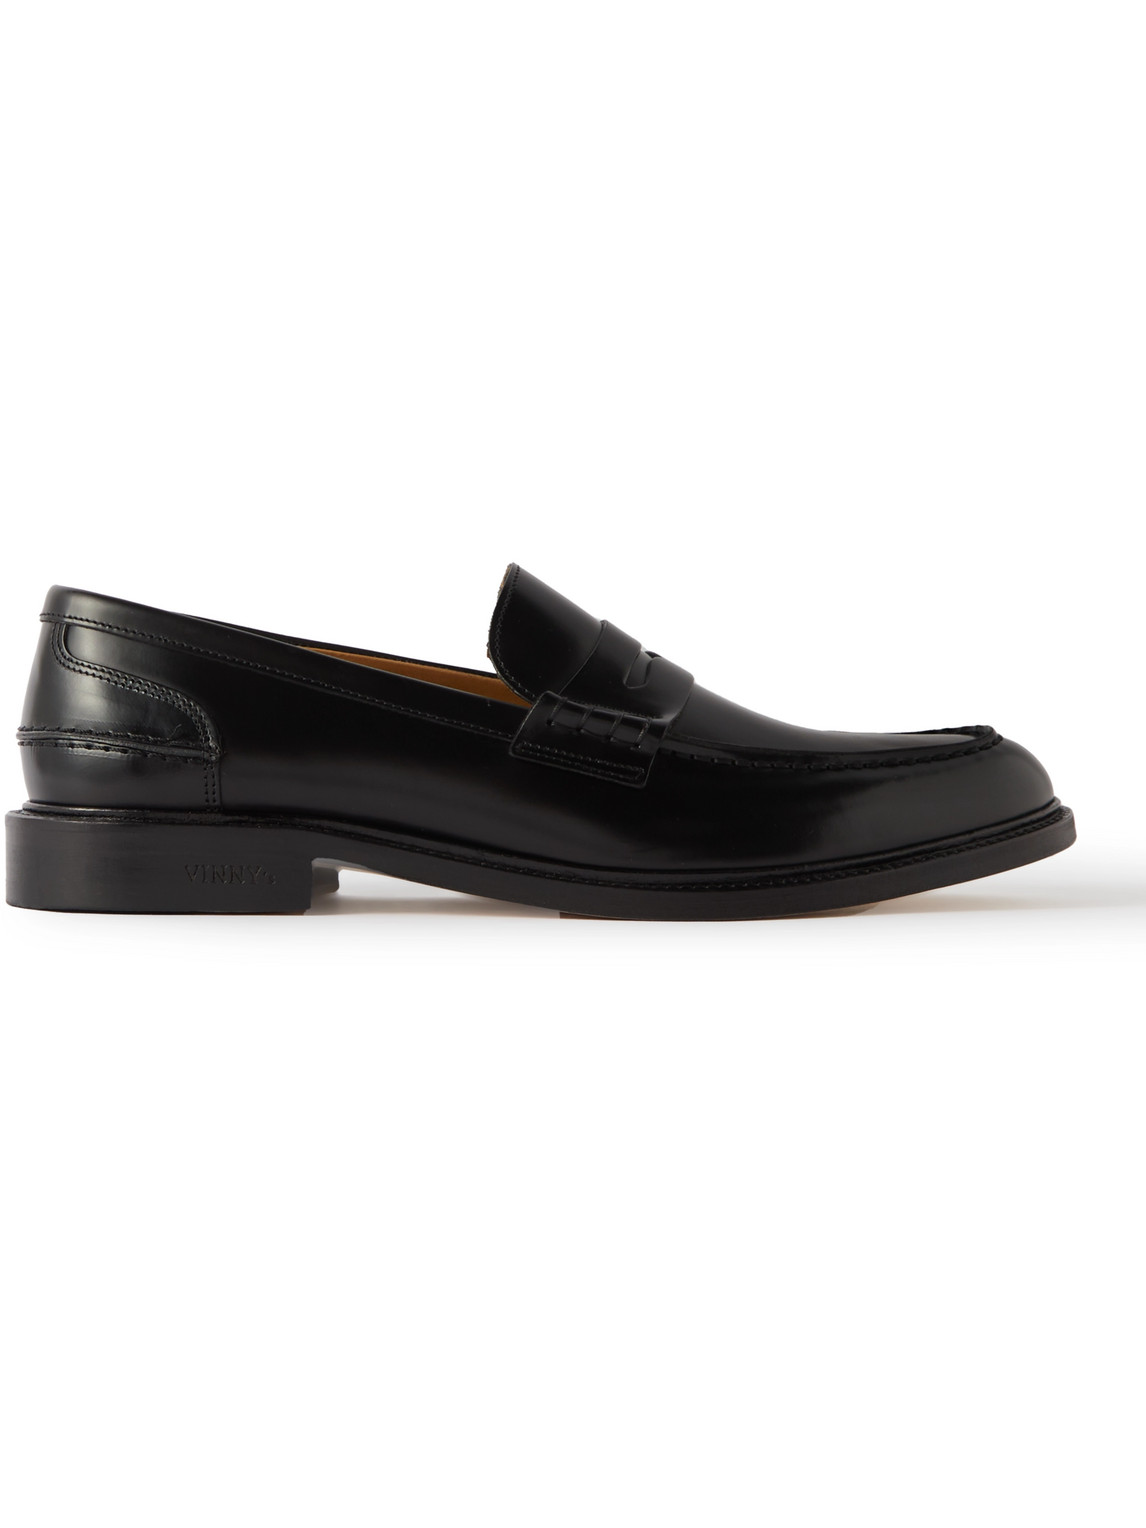 VINNY'S TOWNEE POLISHED-LEATHER PENNY LOAFERS